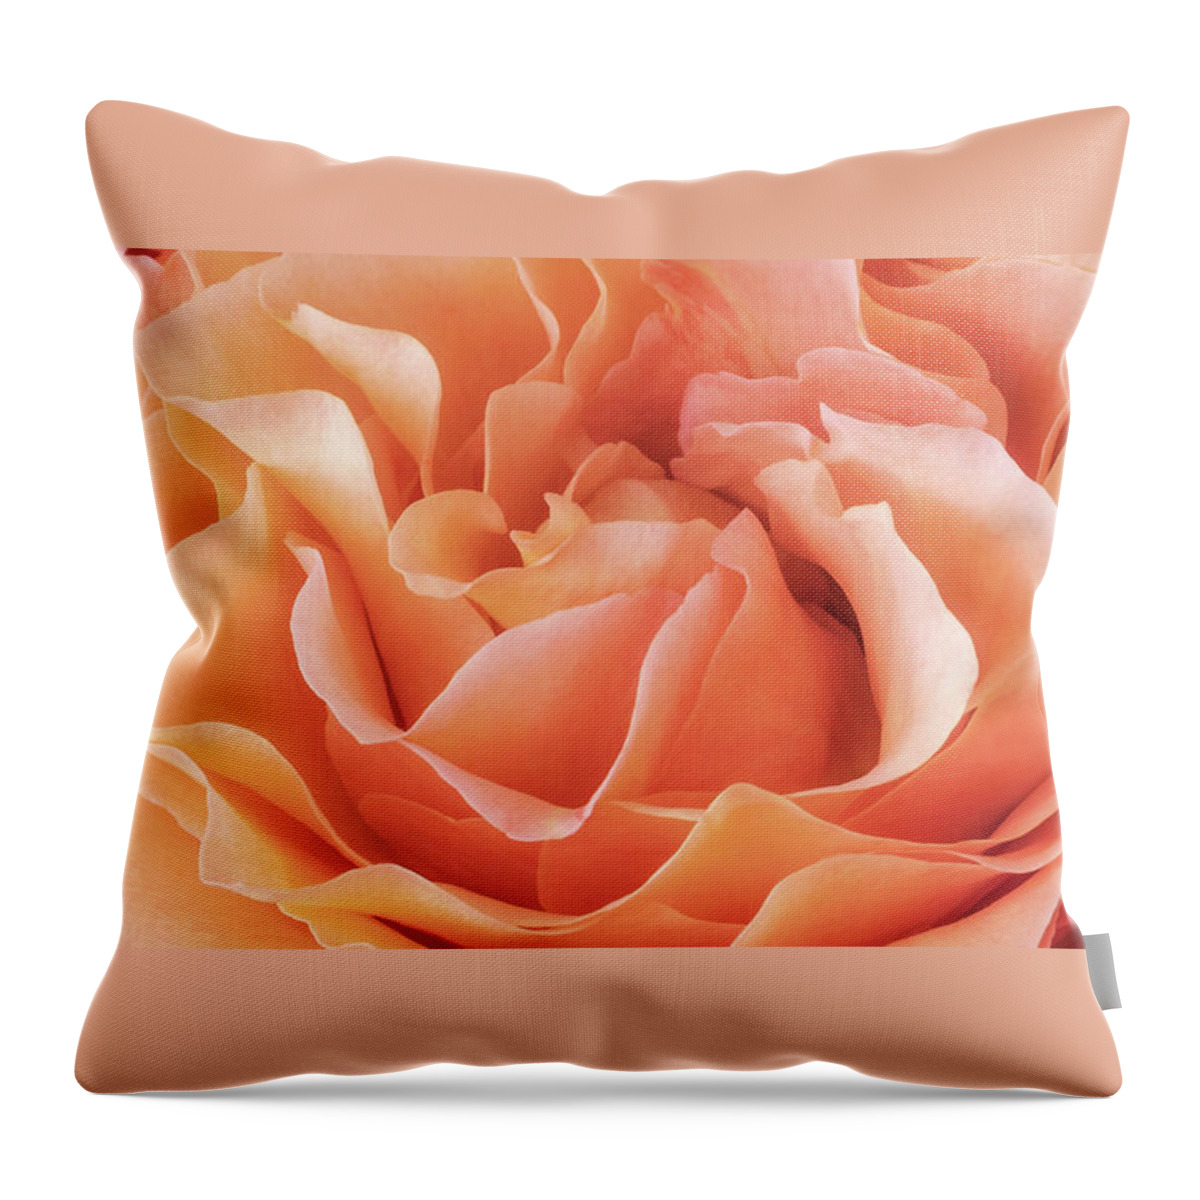 Rose Throw Pillow featuring the photograph Soft And Dreamy - Triptych Middle by Elvira Peretsman